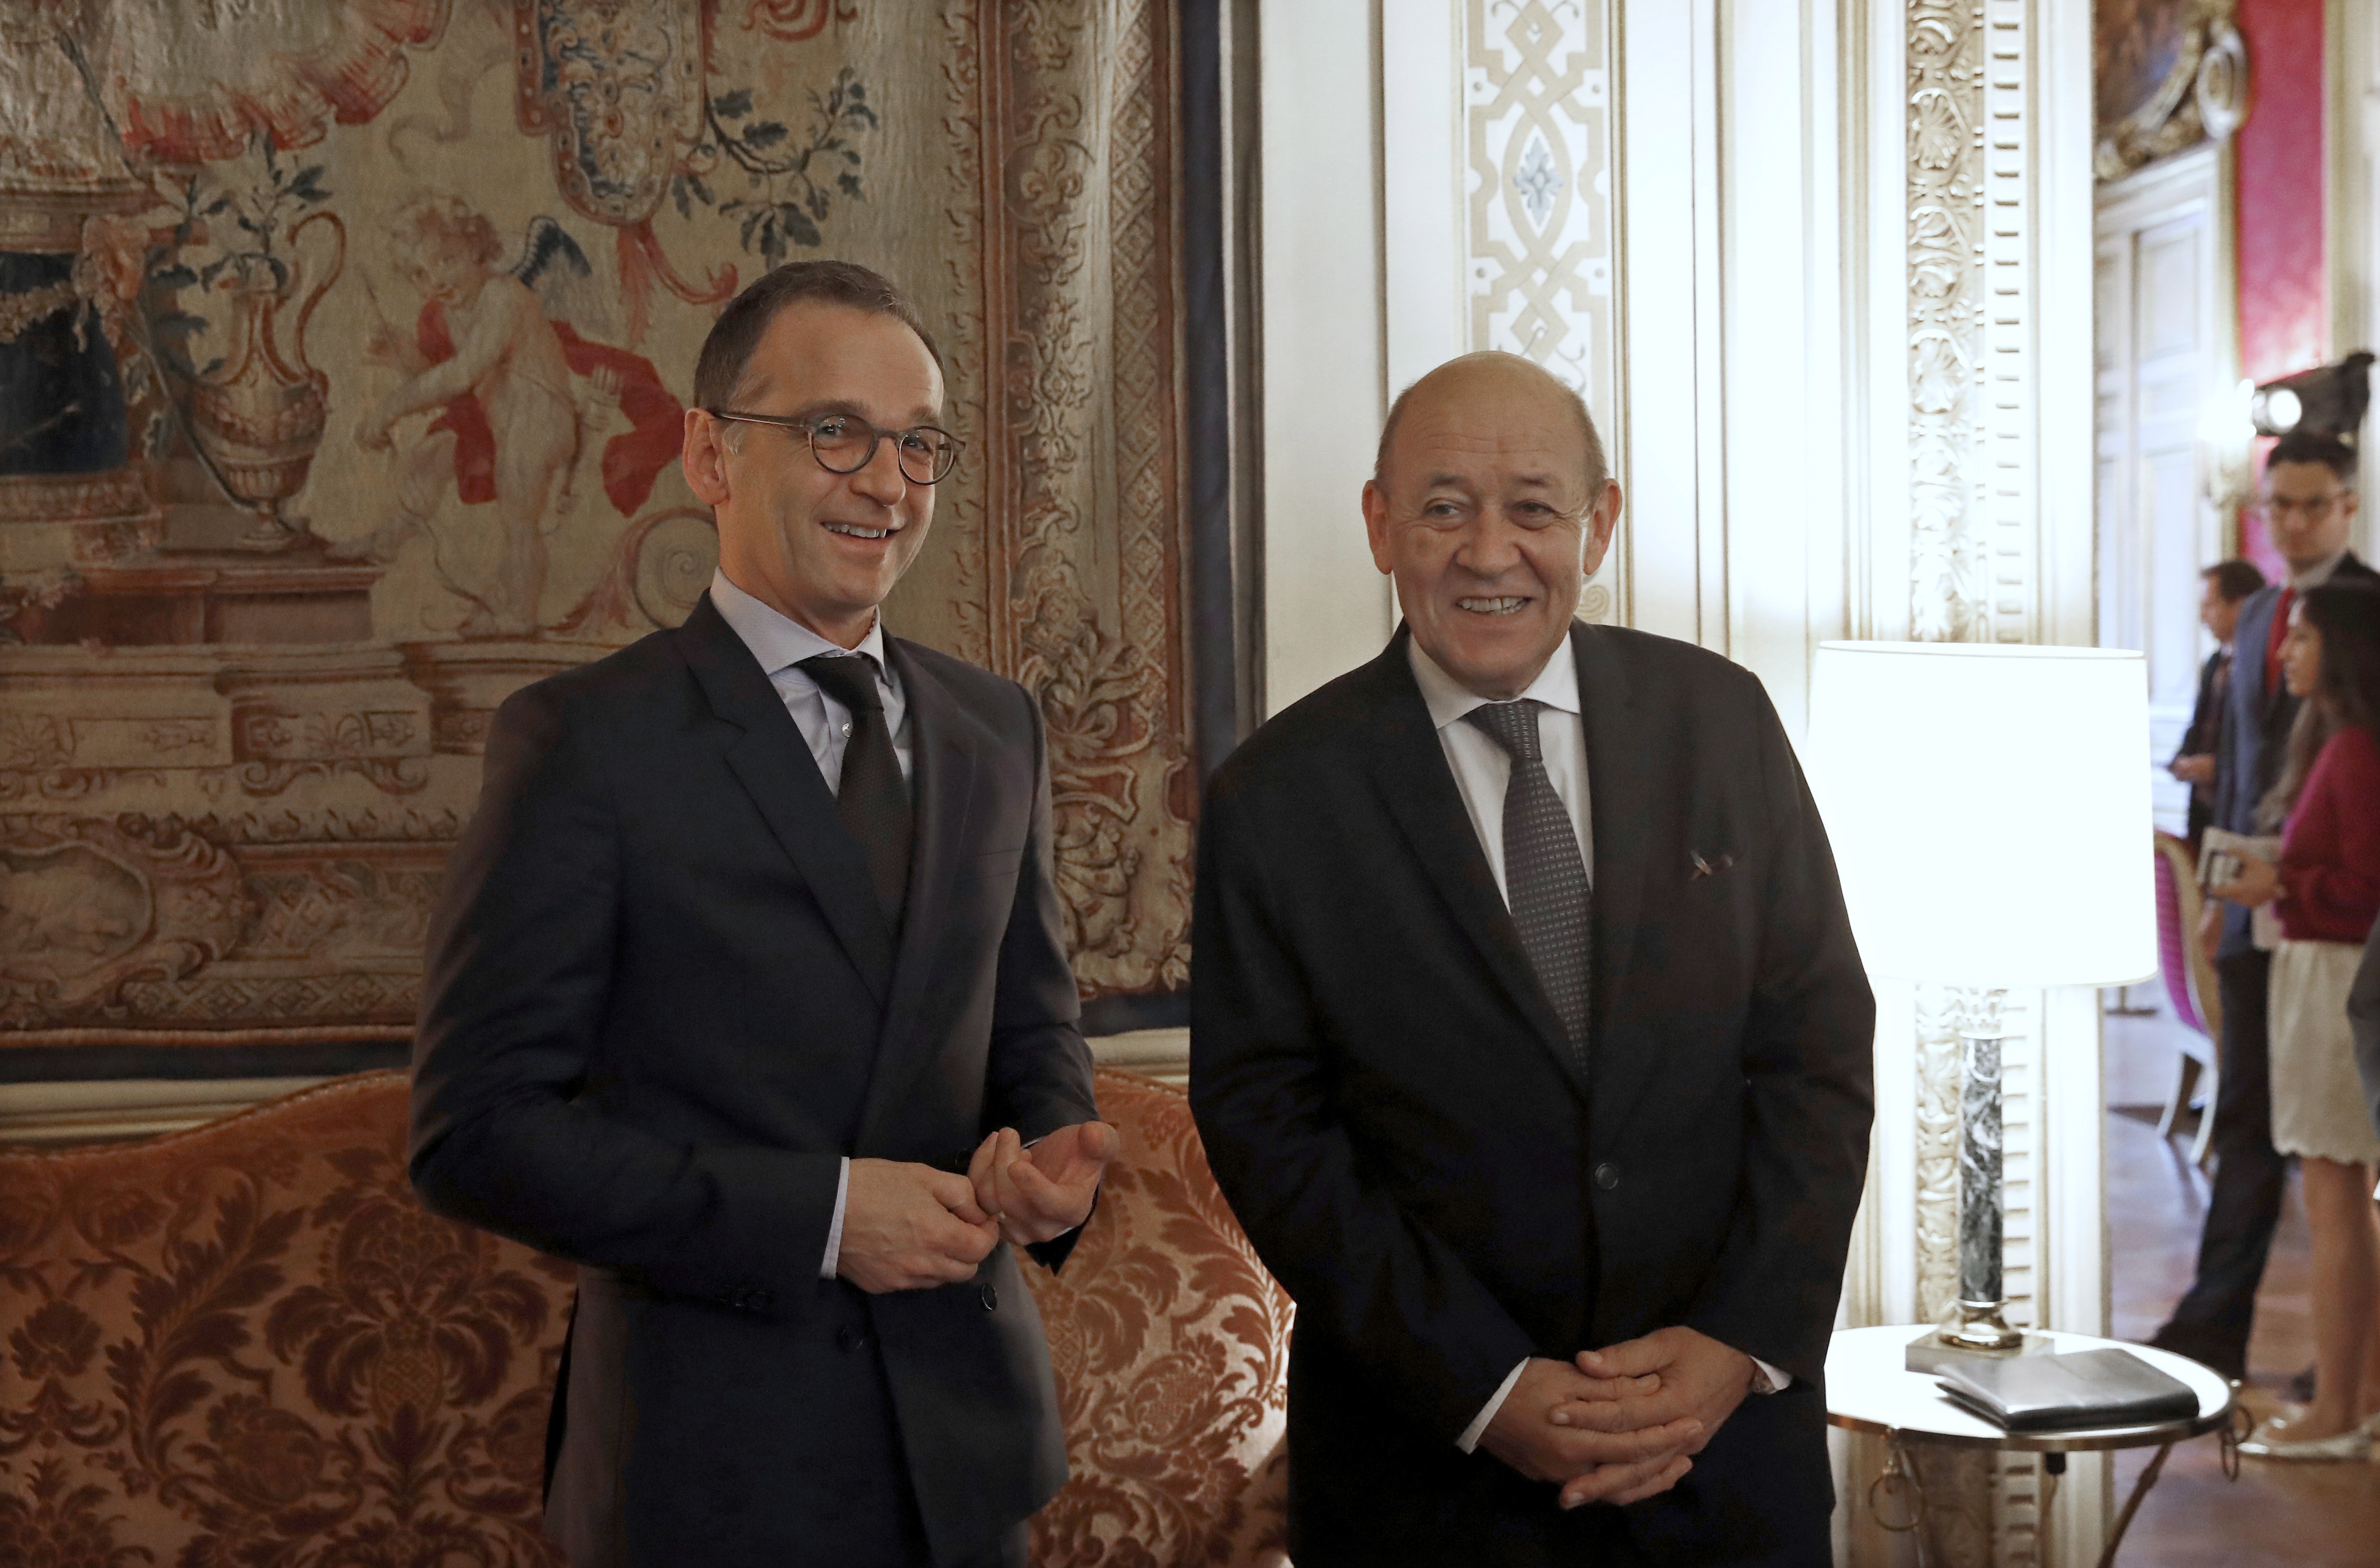 epa07223131 French Foreign Minister Jean-Yves Le Drian (R) greets Germany's Foreign Minister Heiko Maas before a meeting in Paris, France, 11 December 2018.  EPA/CHRISTOPHE ENA / POOL  MAXPPP OUT